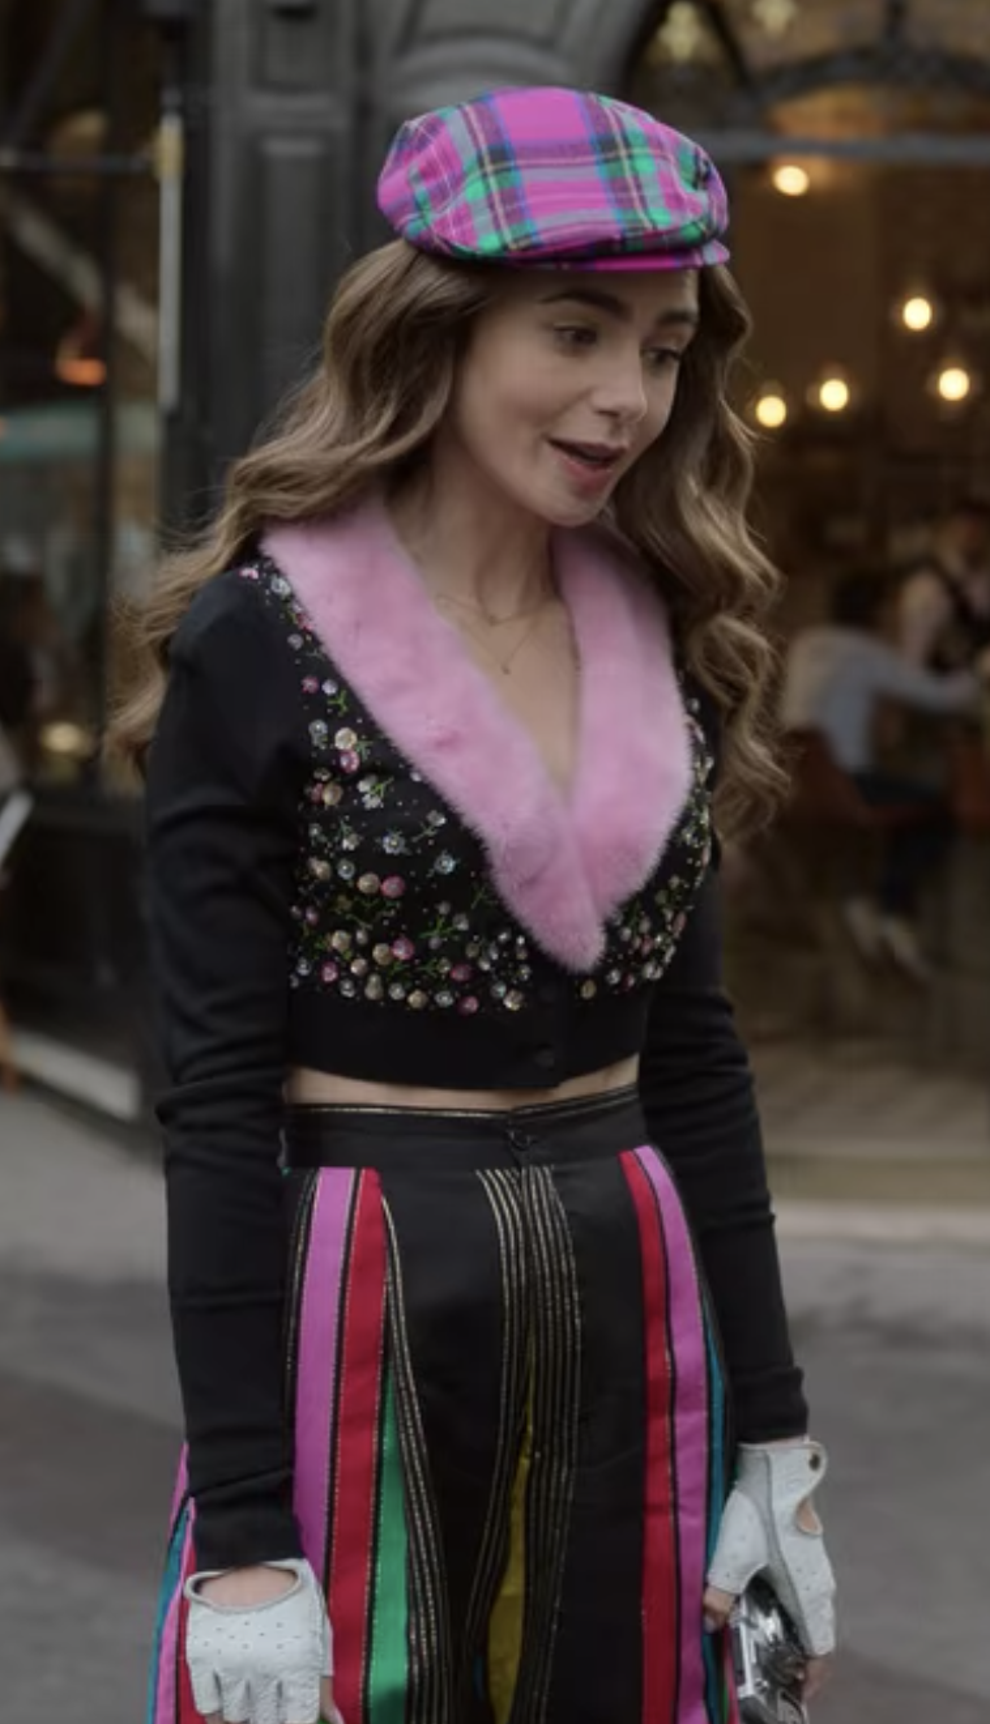 Are These Outfits That Emily Wore In Emily In Paris Cute Or Bad?